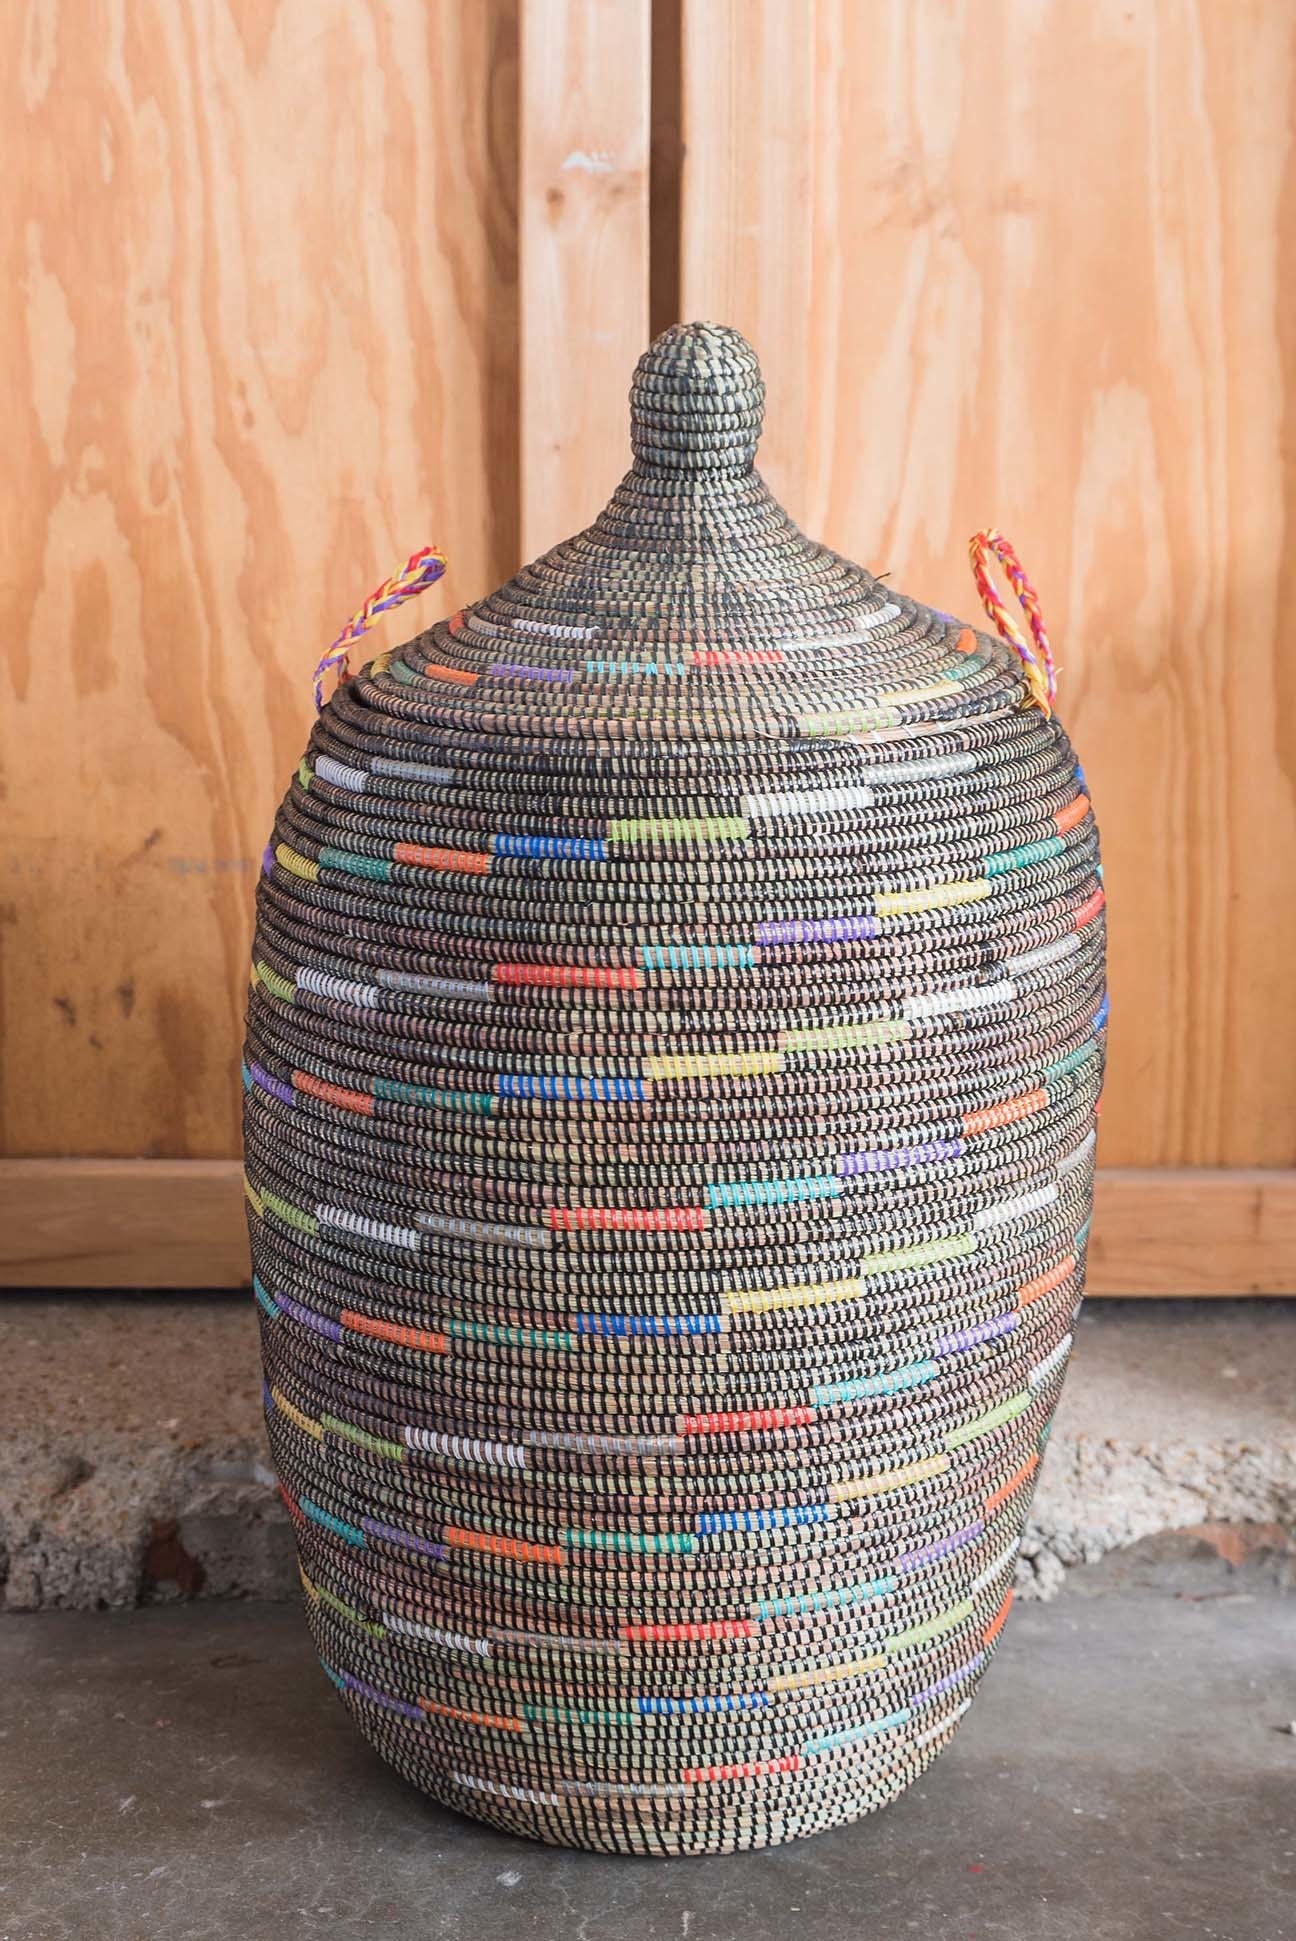 A large woven basket with a lid and handles on the side with black and multi-colored lines all over